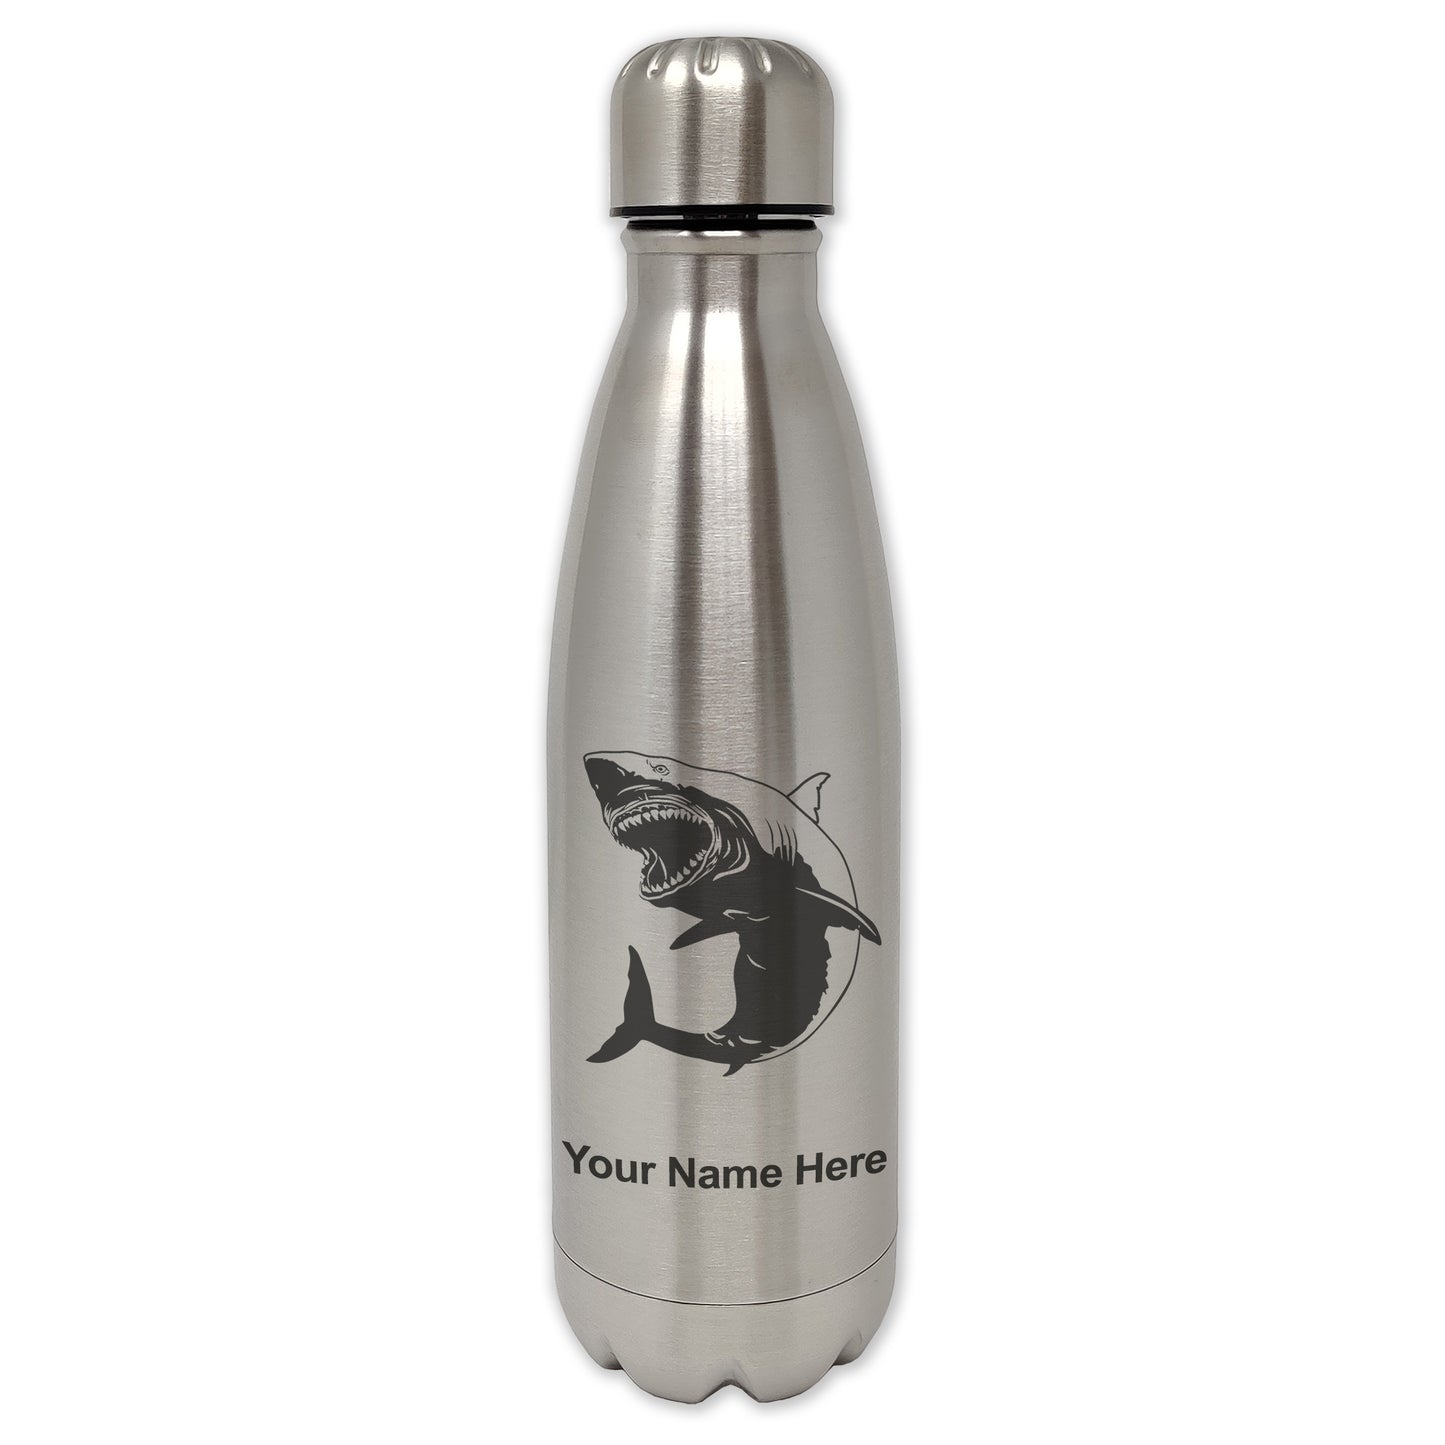 LaserGram Single Wall Water Bottle, Great White Shark, Personalized Engraving Included